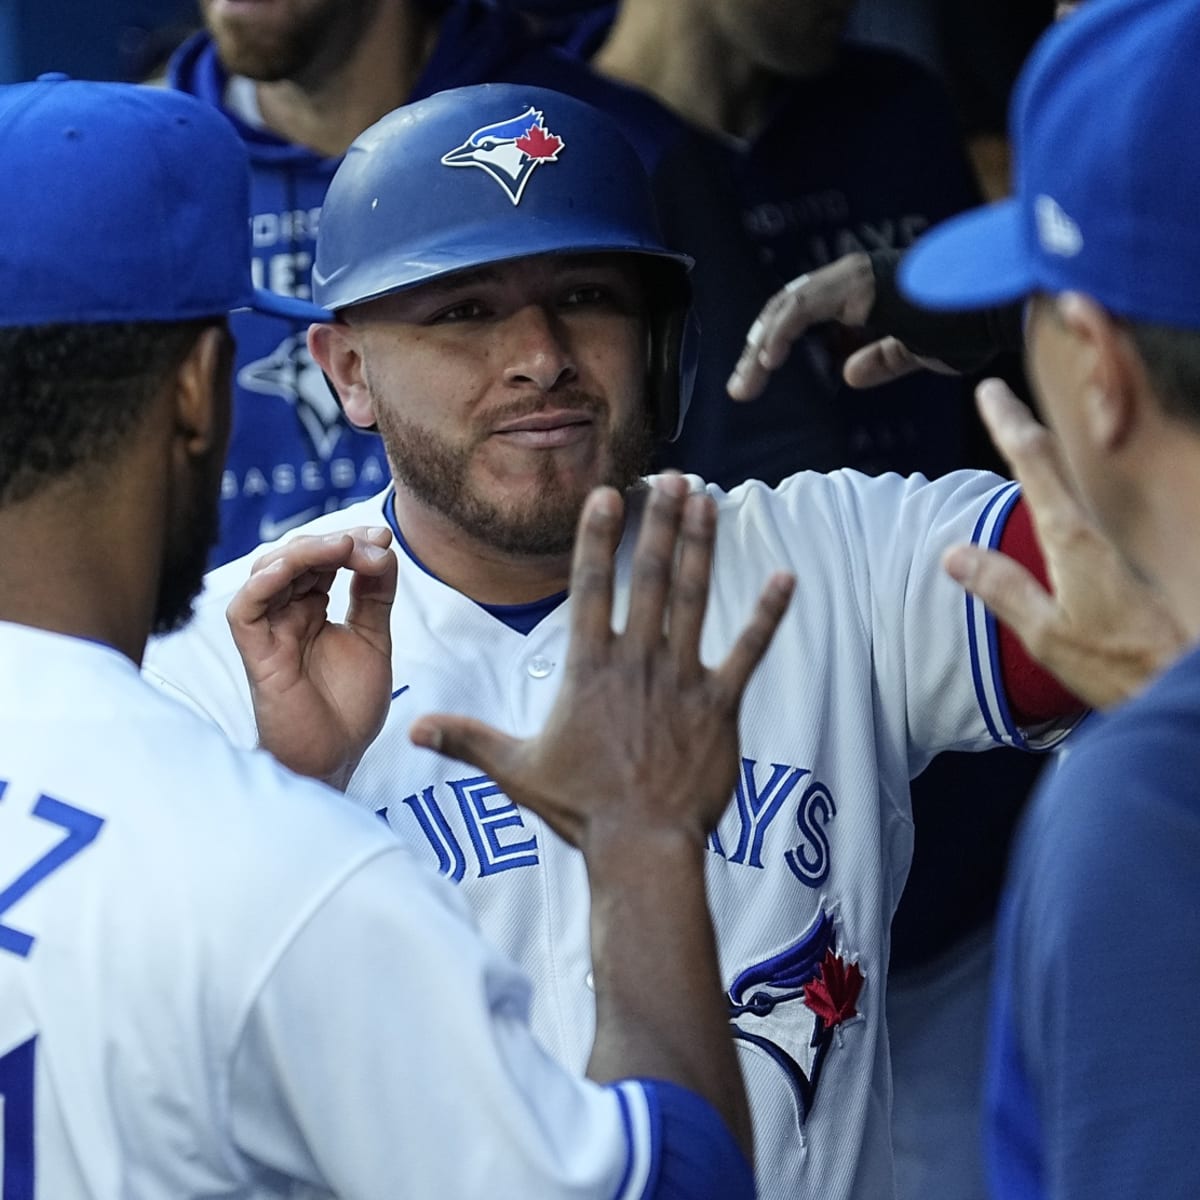 3 Blue Jays Lead Positions in First Update of All-Star Game Voting